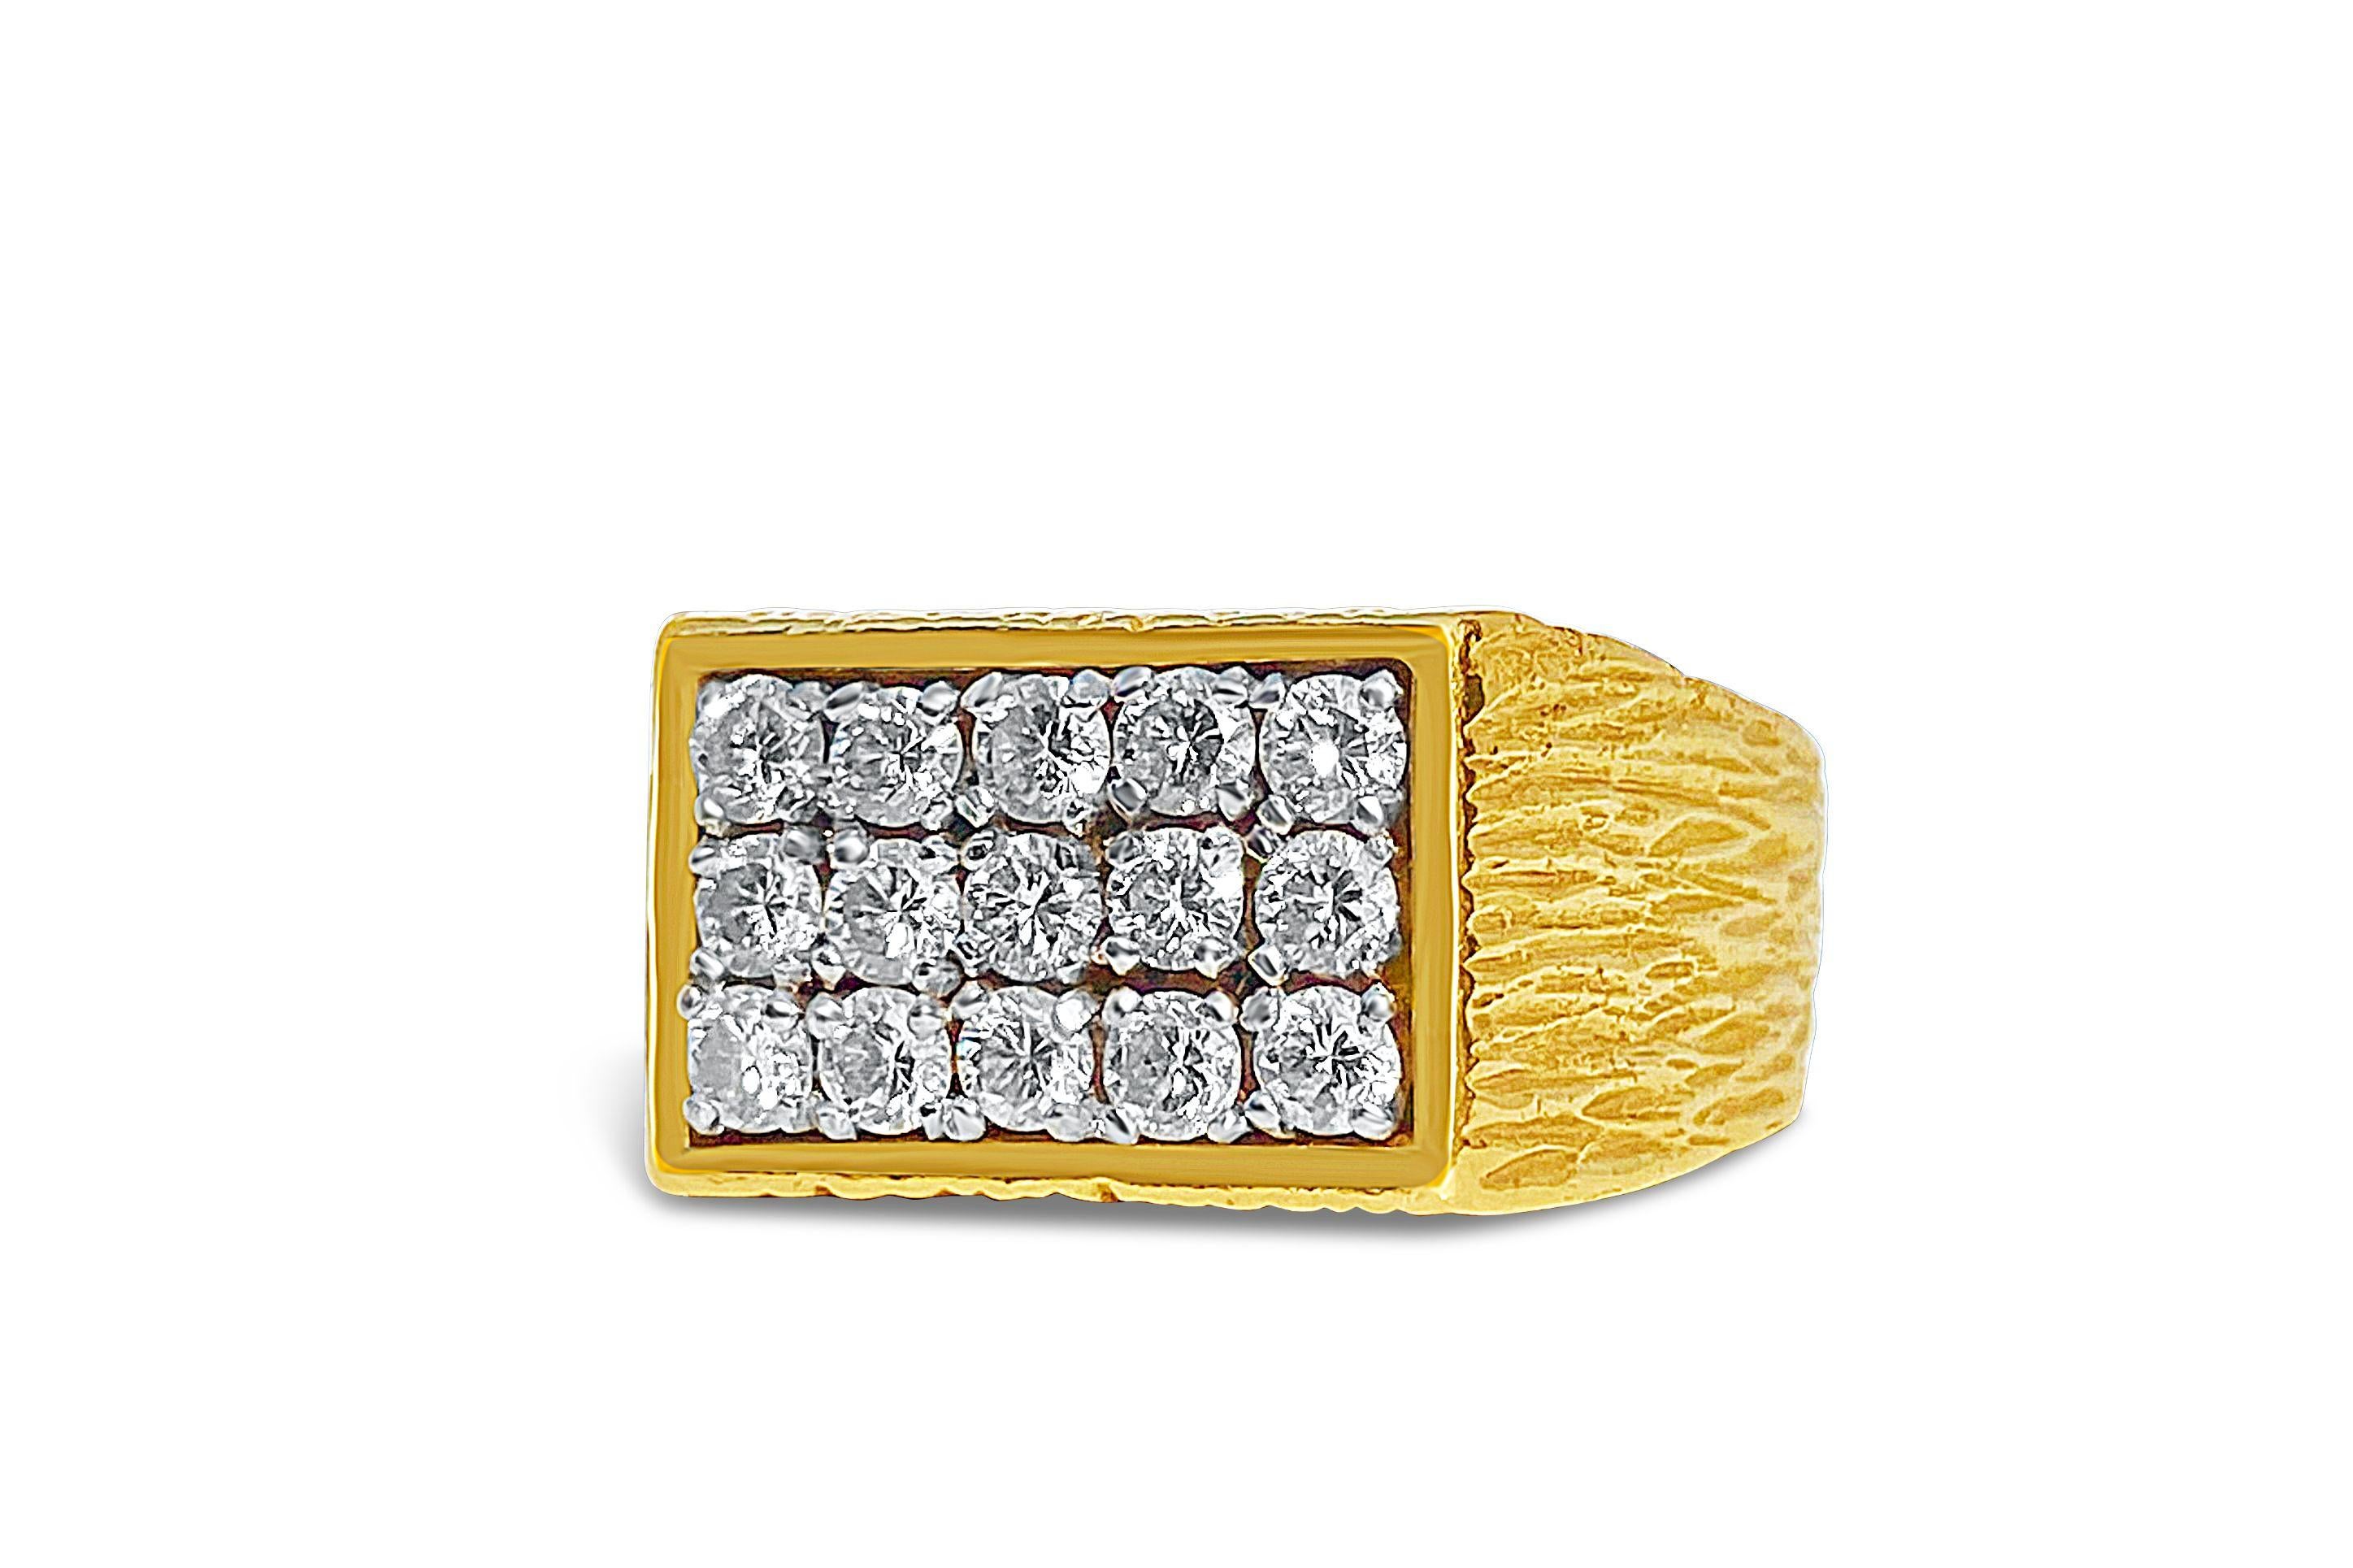 Centering 15 Round-Brilliant Cut Diamonds totaling 0.65 Carats and set in 14K Yellow Gold, this 14.7 gram, Italian-made men's ring is a superlative choice for the discerning collector. 

Details:
✔ Stone: White Diamond
✔ Diamond Weight: 0.65